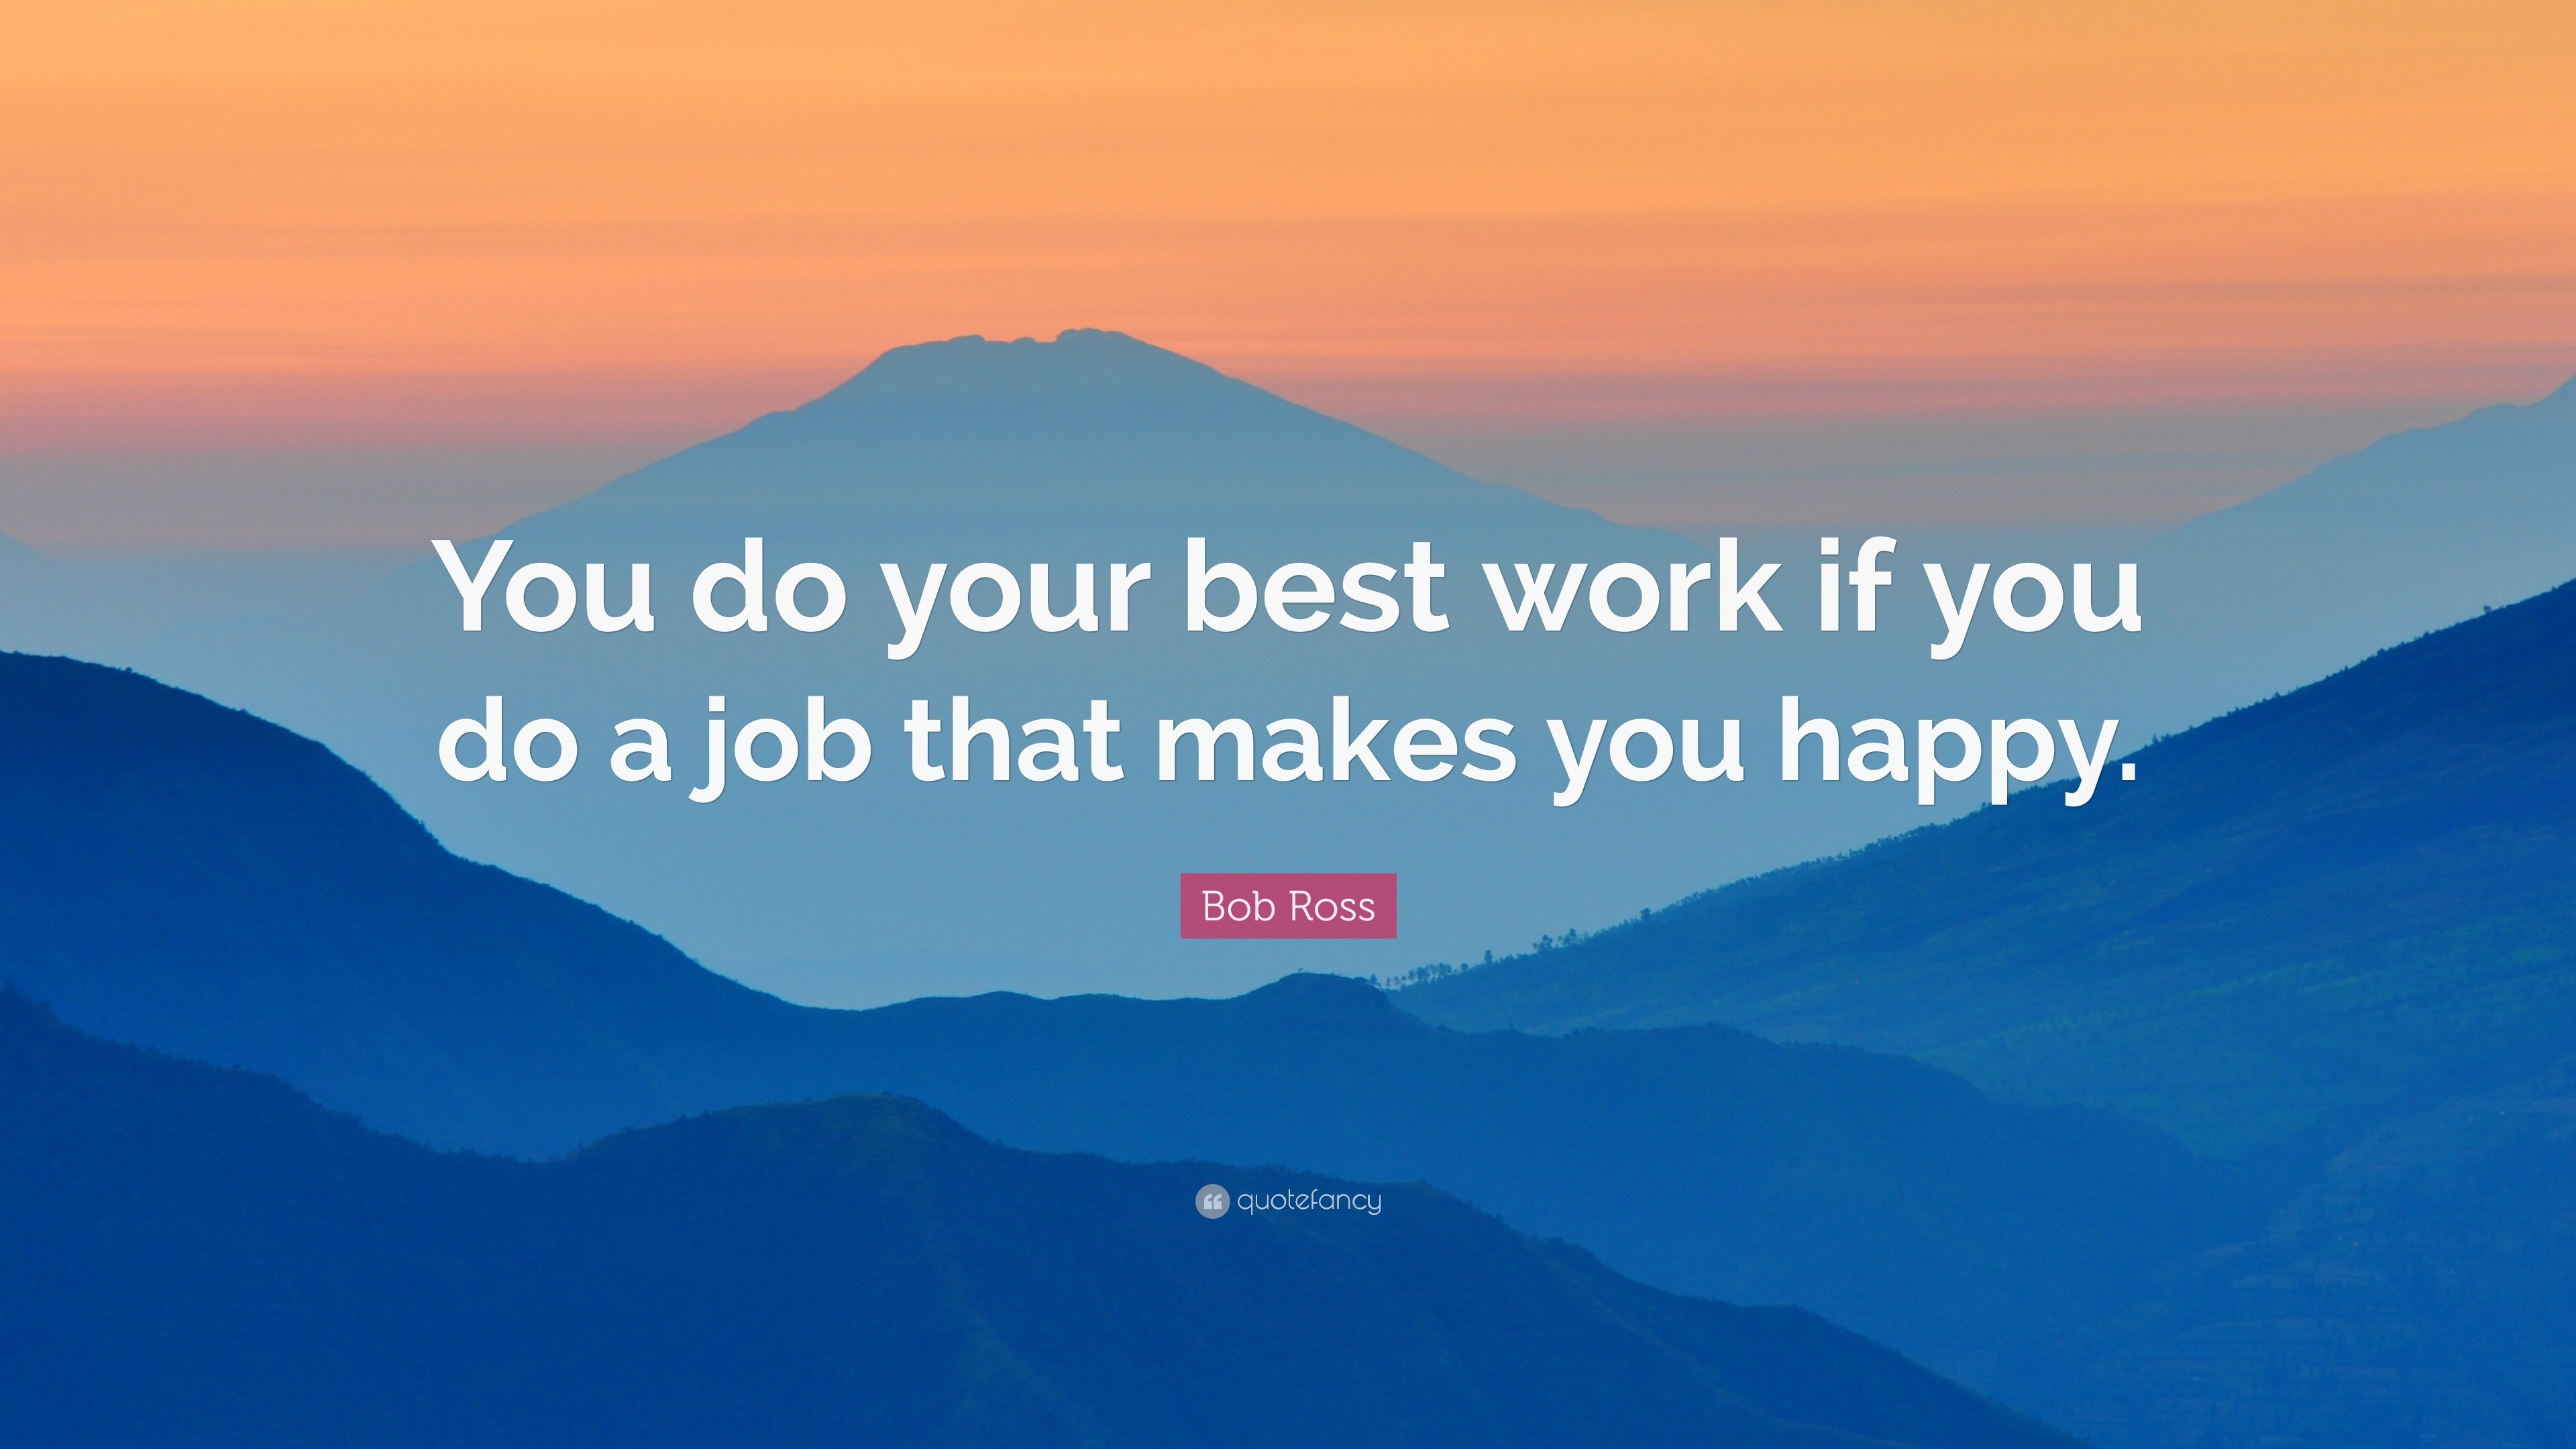 Bob Ross Quote: “You do your best work if you do a job that makes you